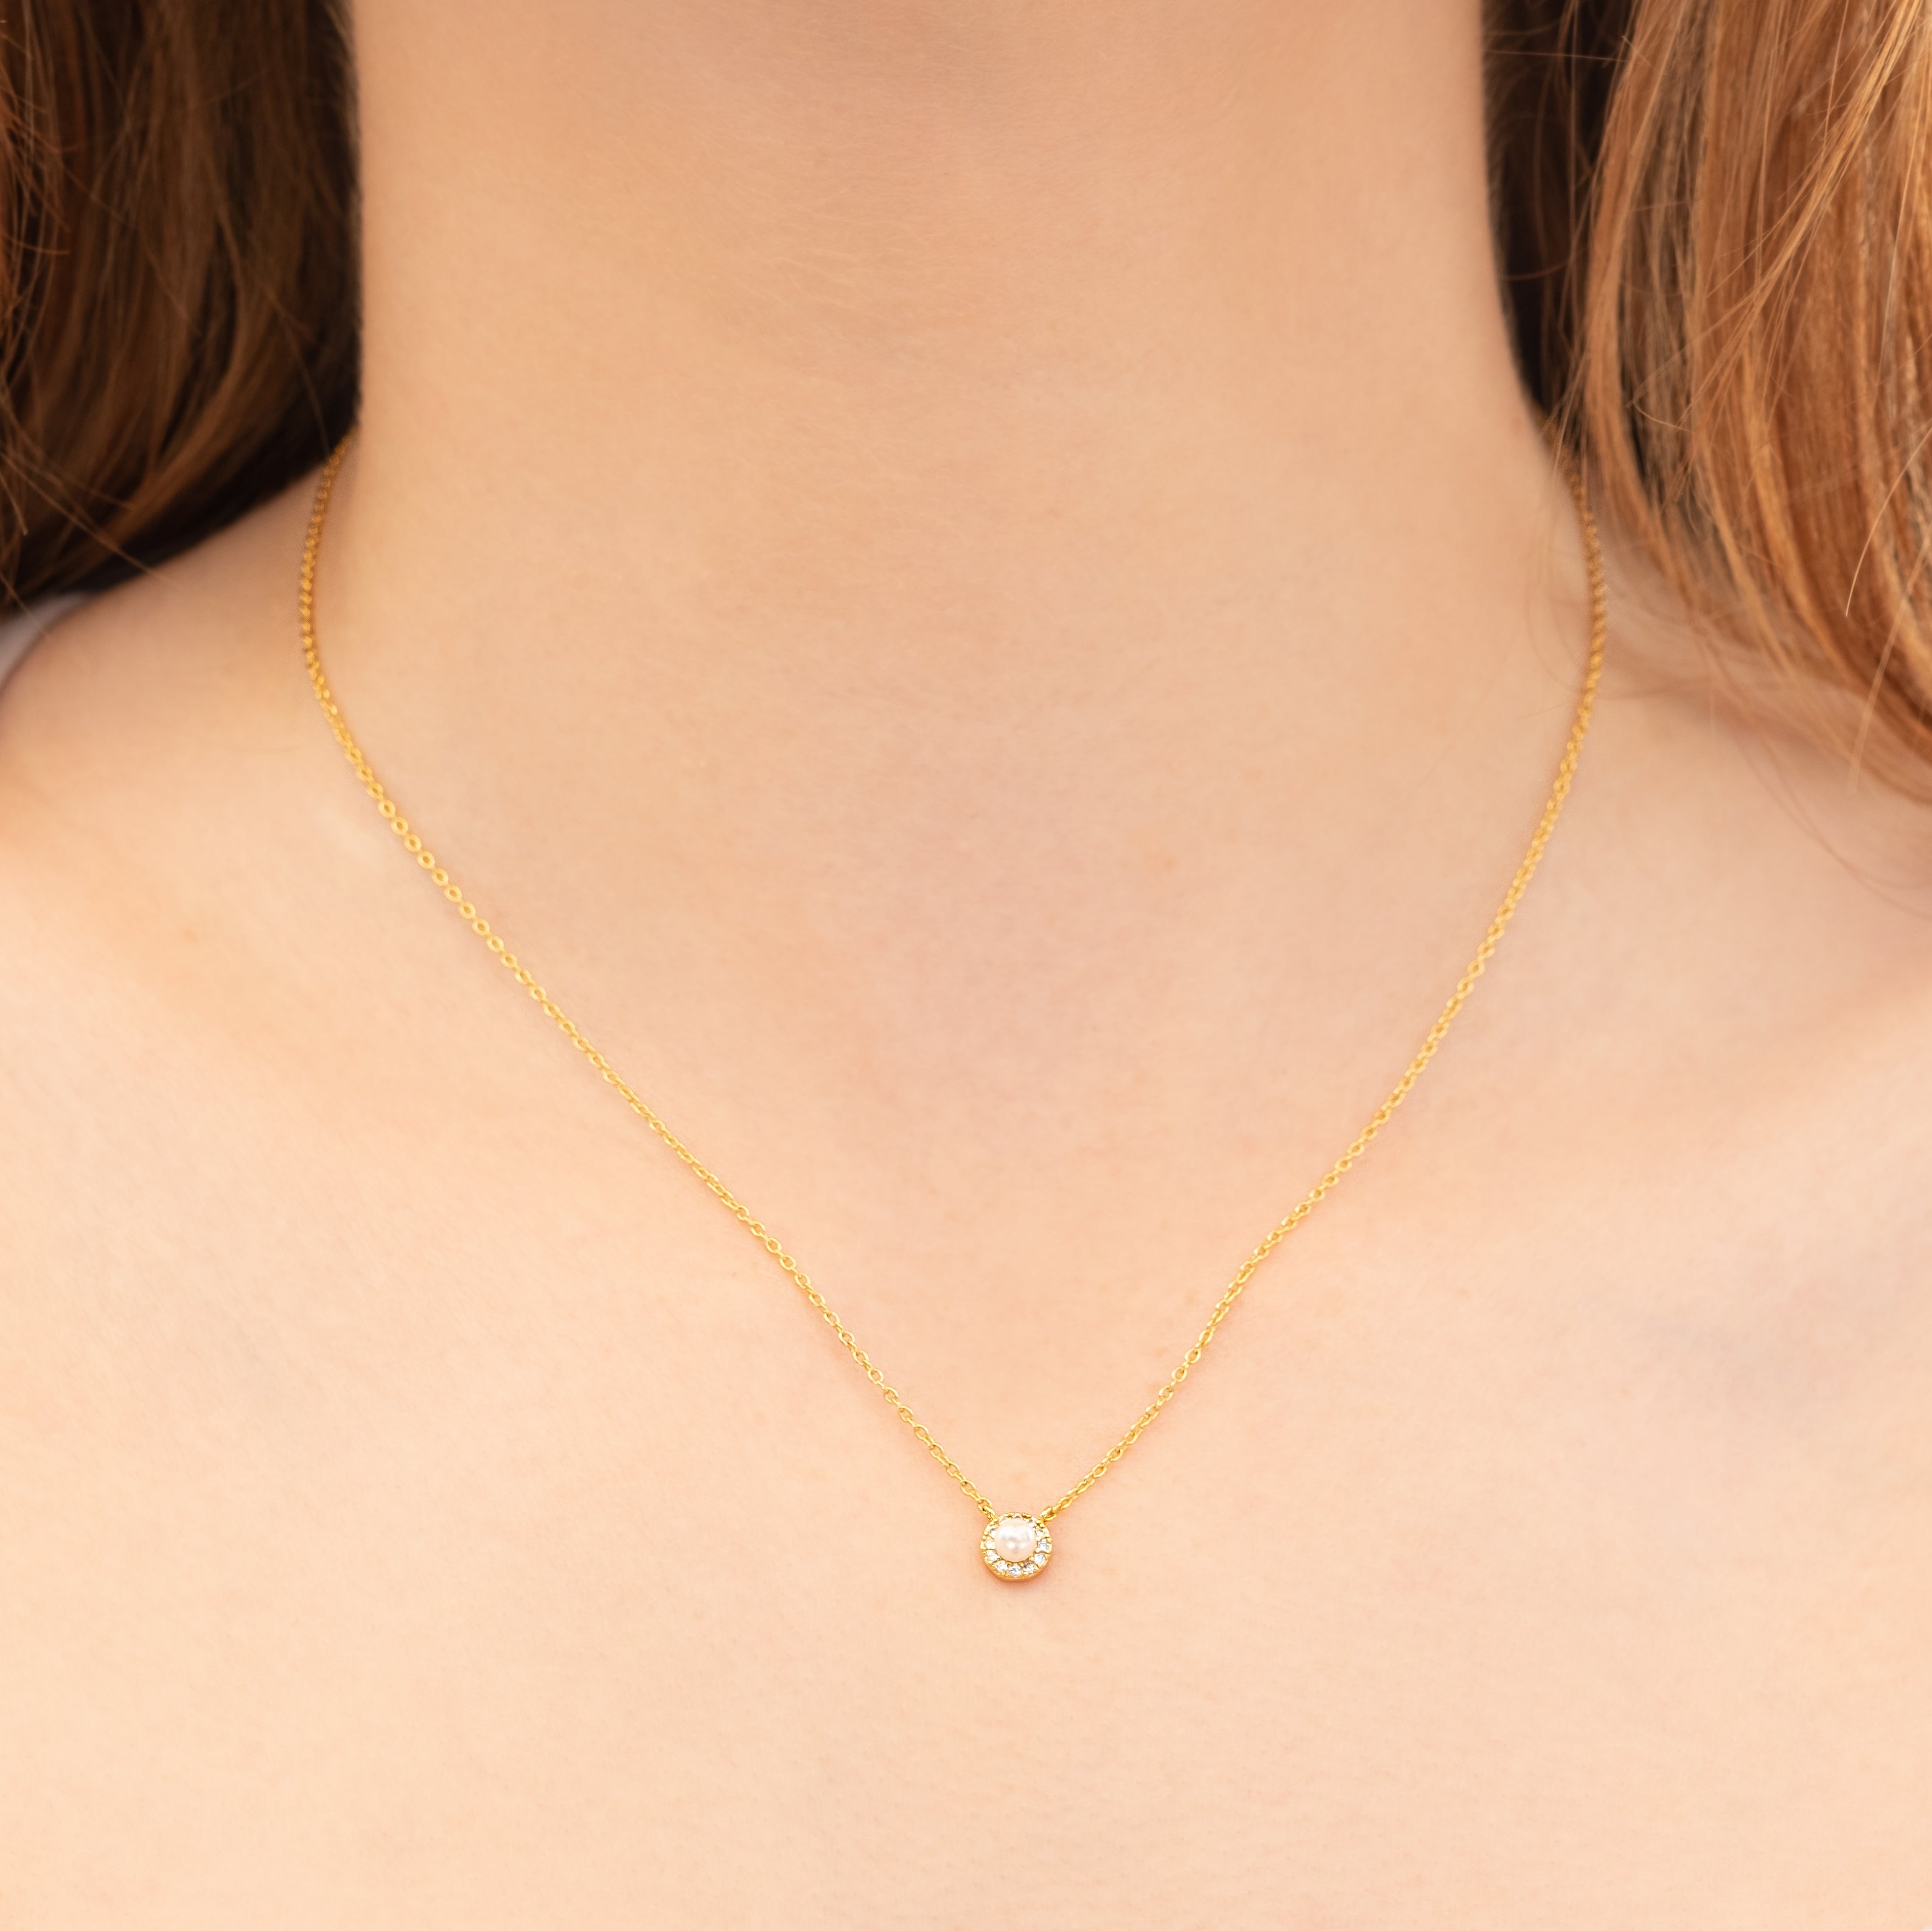 Tiny pearl pendant in gold plating